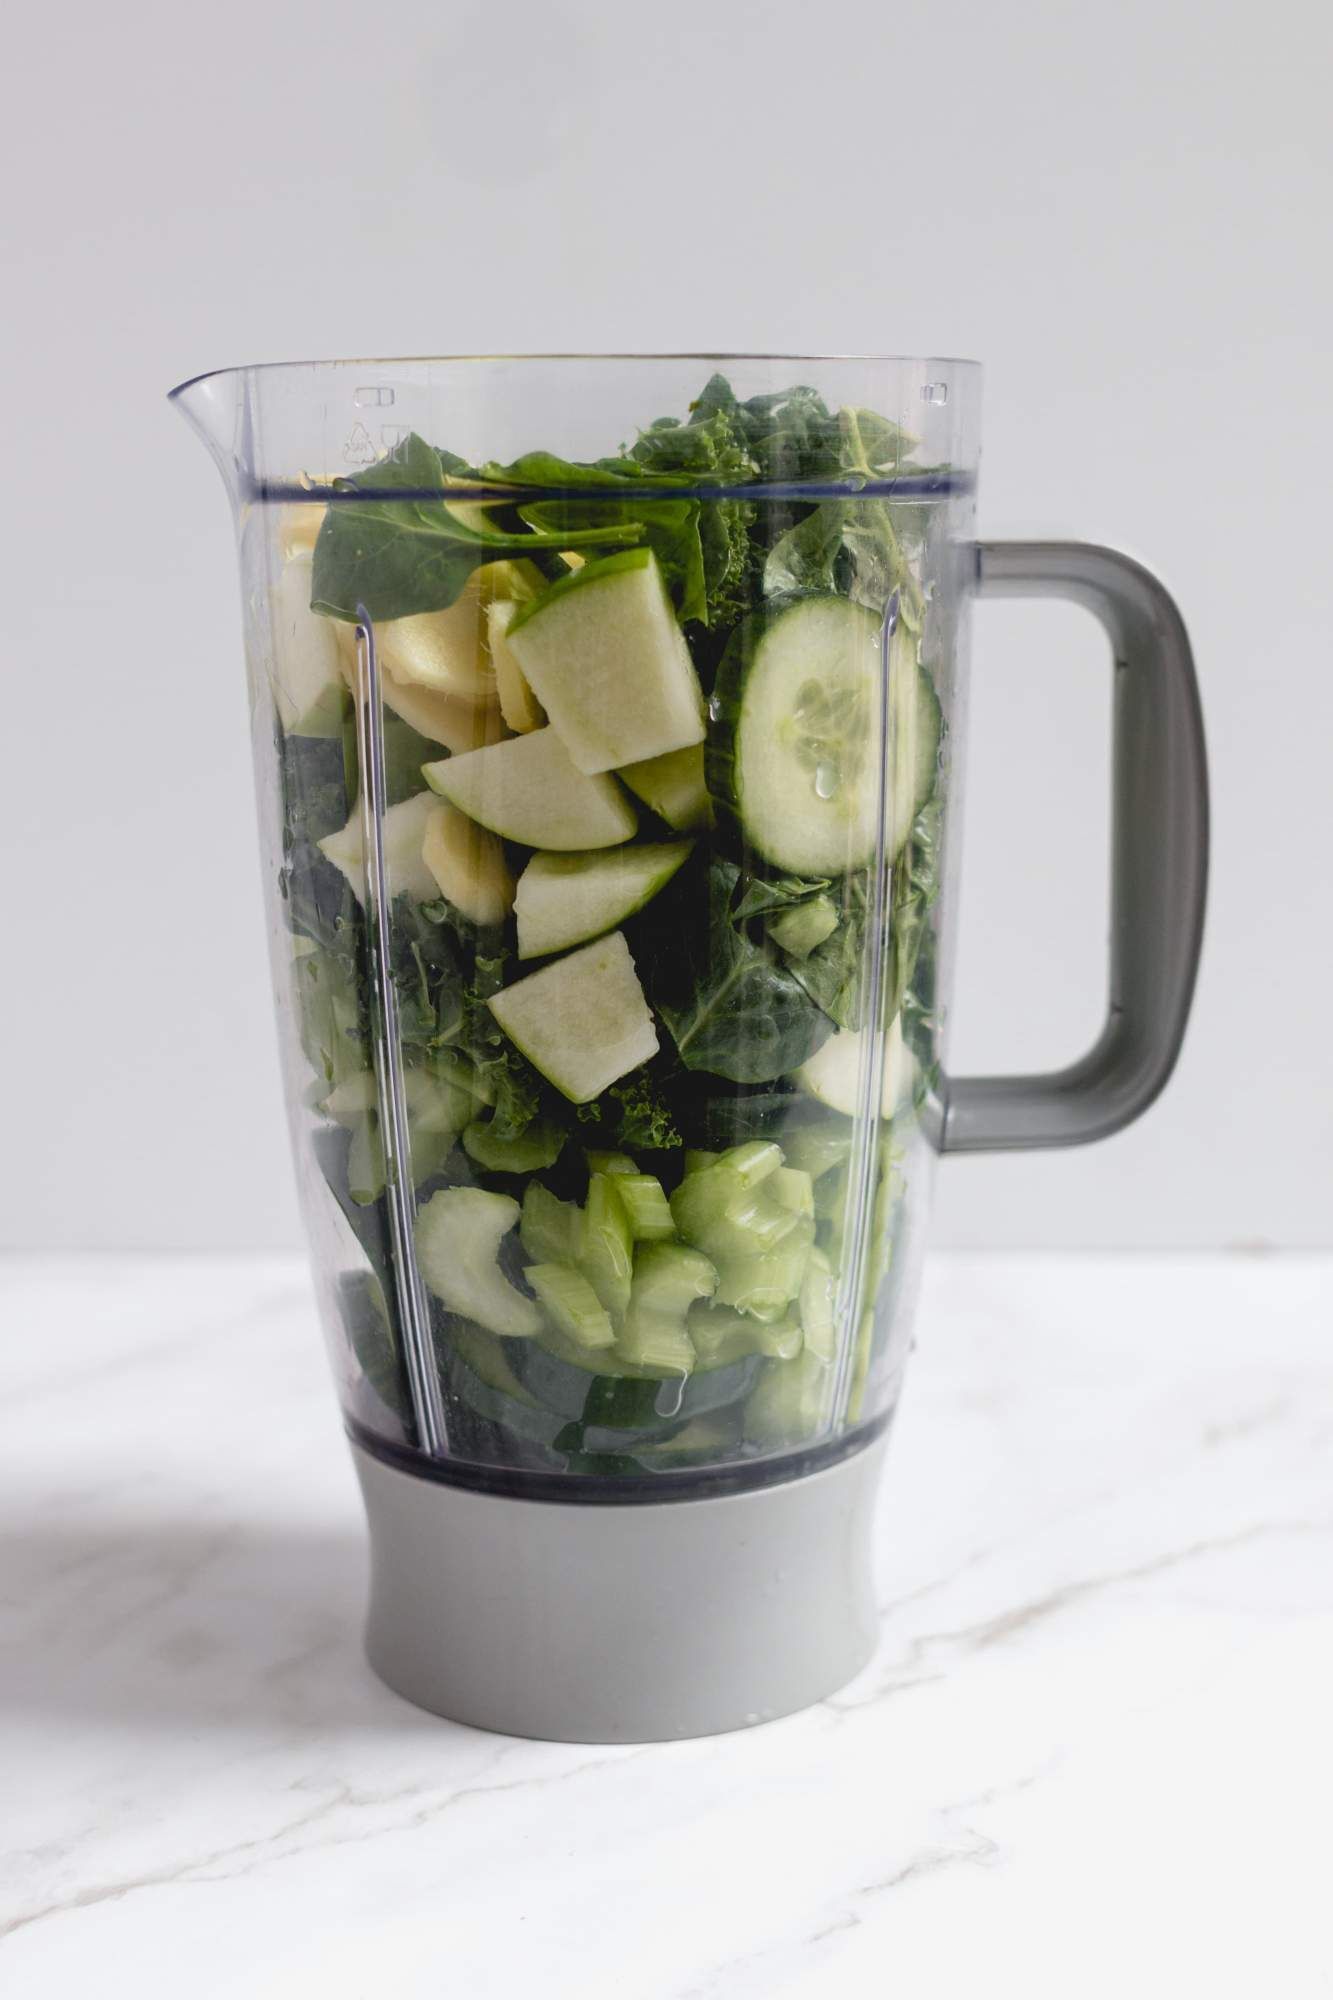 Blender filled with kale, spinach, celery, green apples, cucumbers, and lemon.